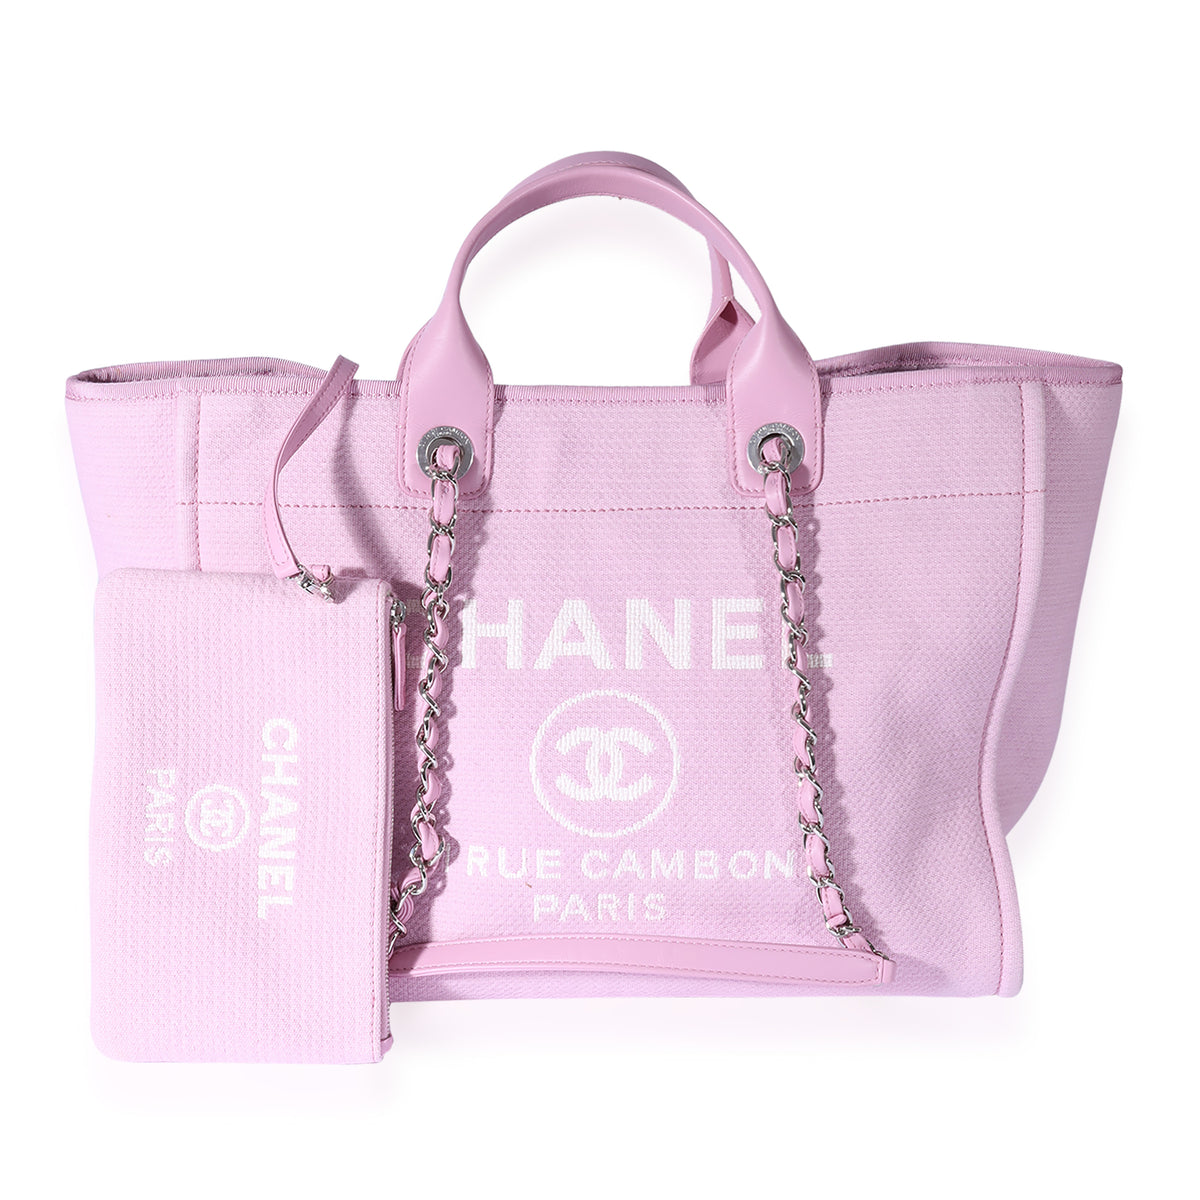 Chanel Pink Canvas Large Deauville Tote